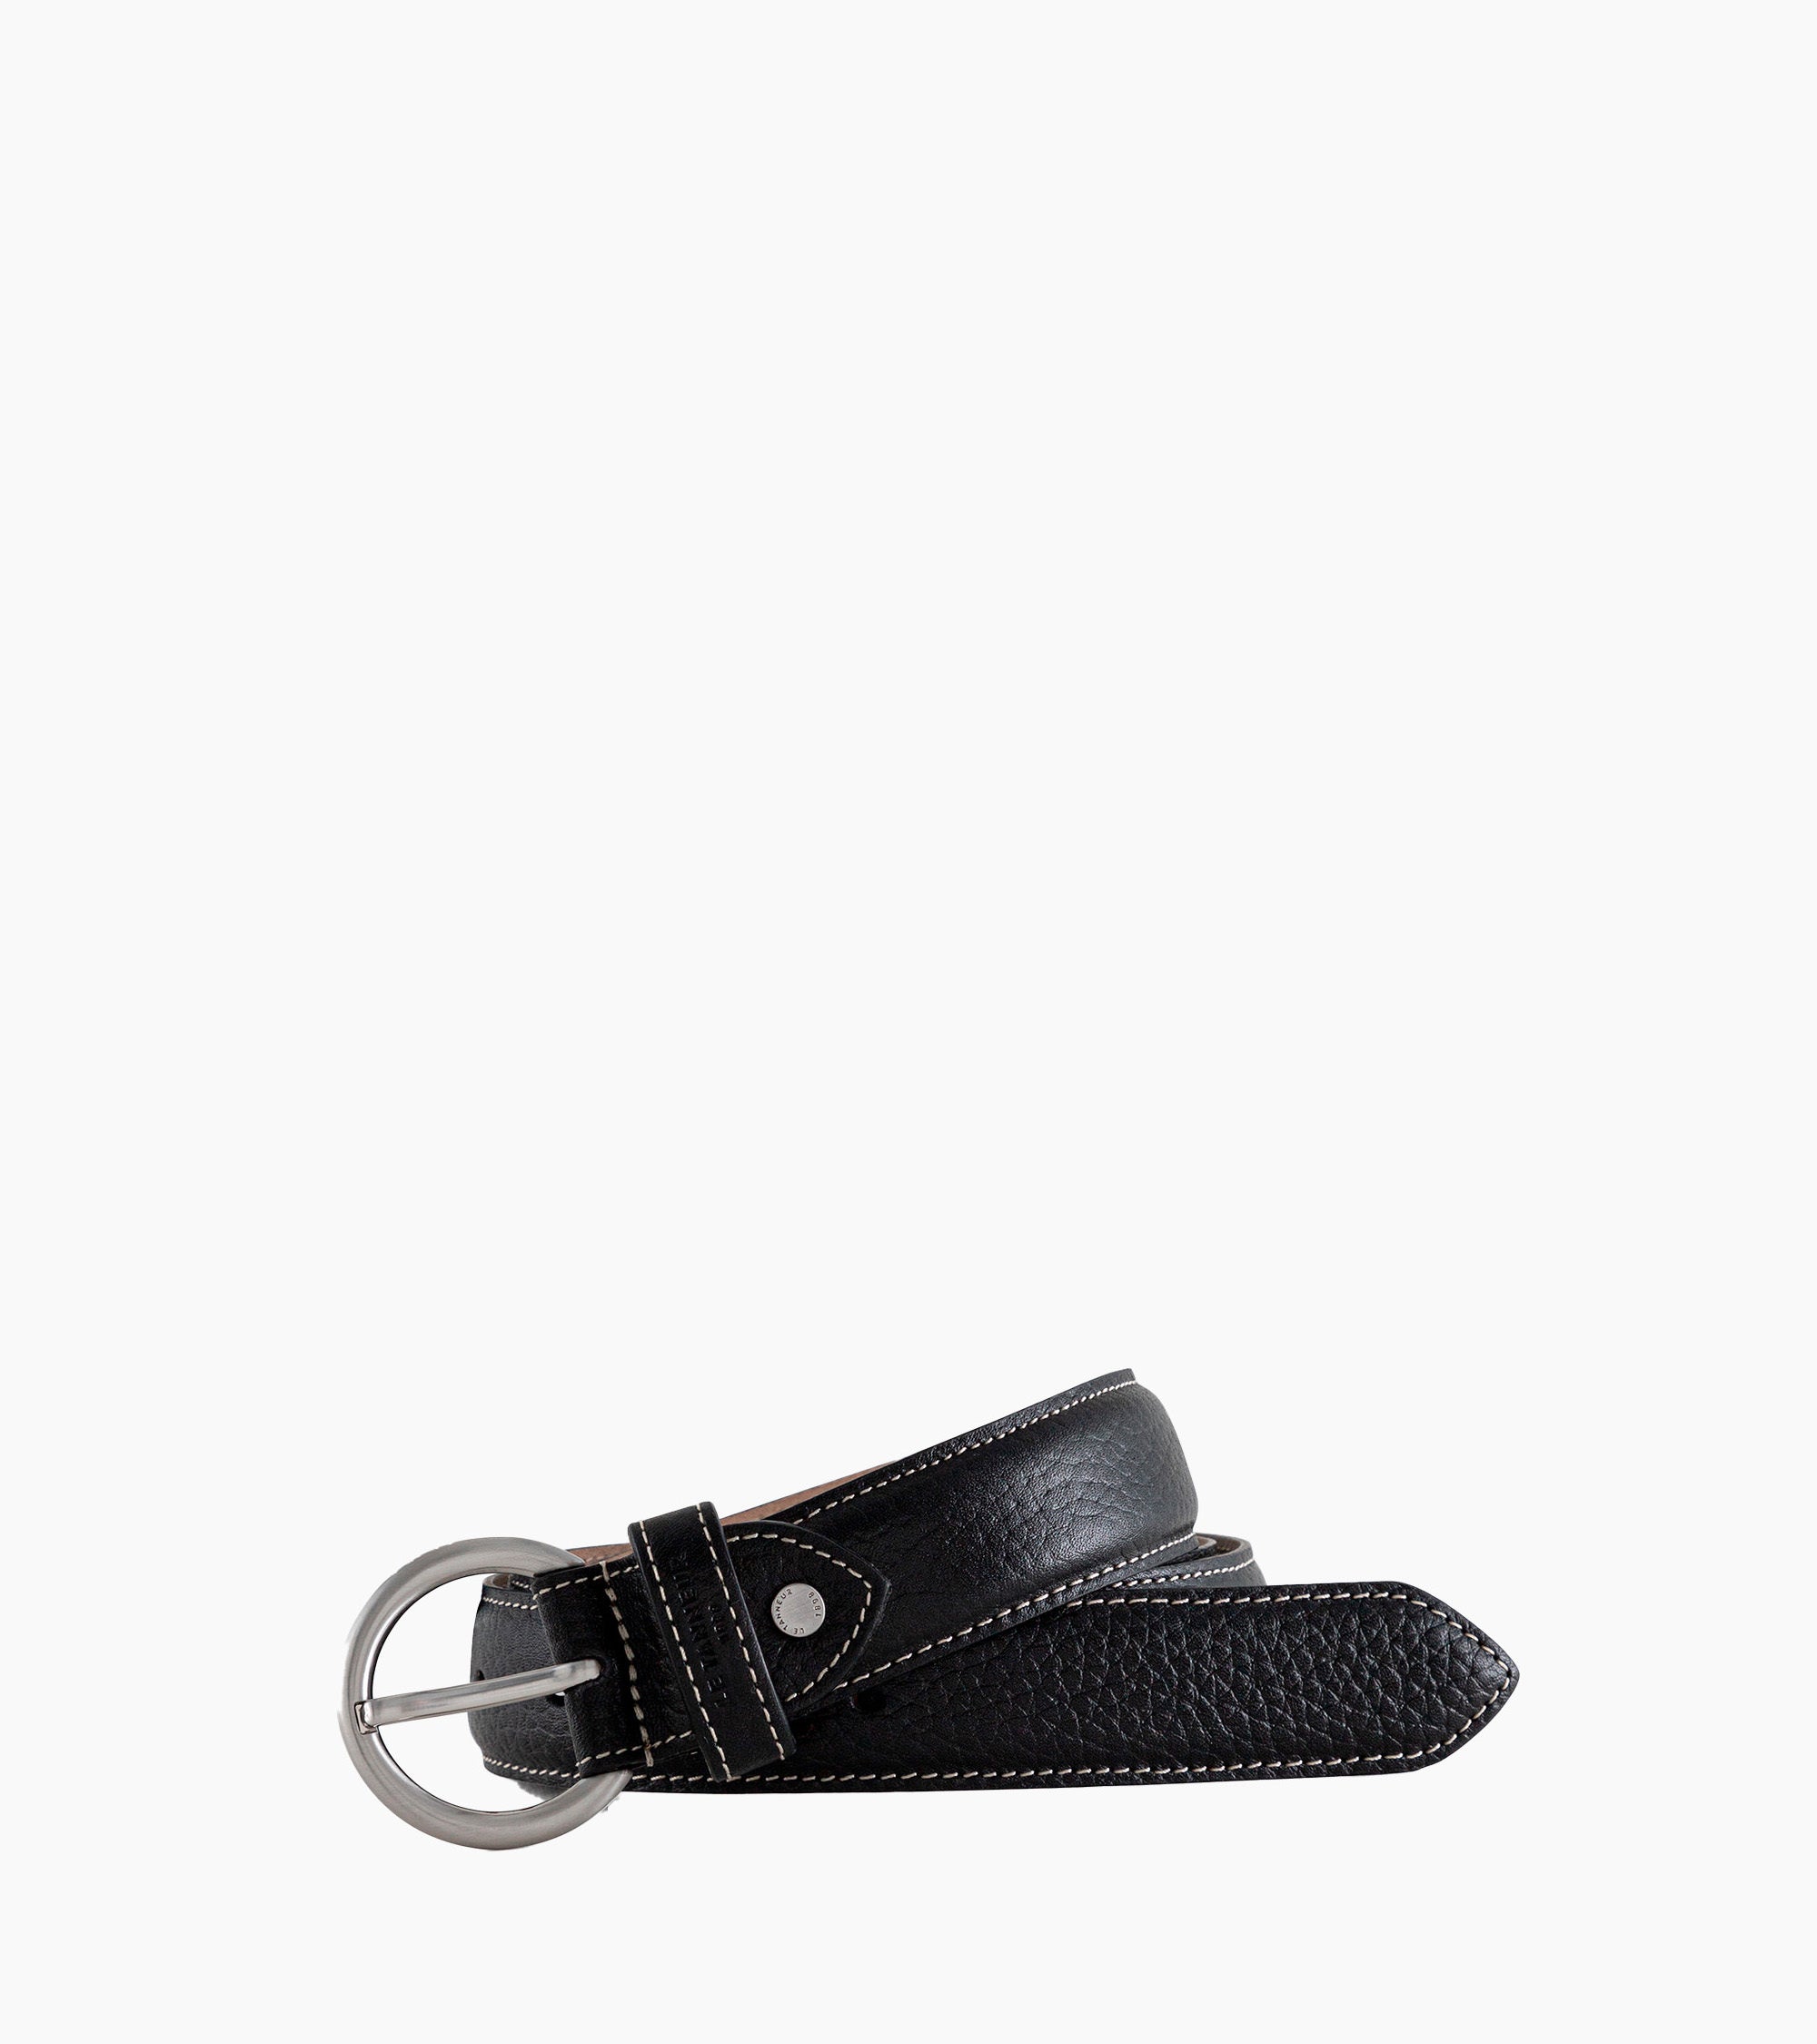 Women's belt with round buckle in grained leather